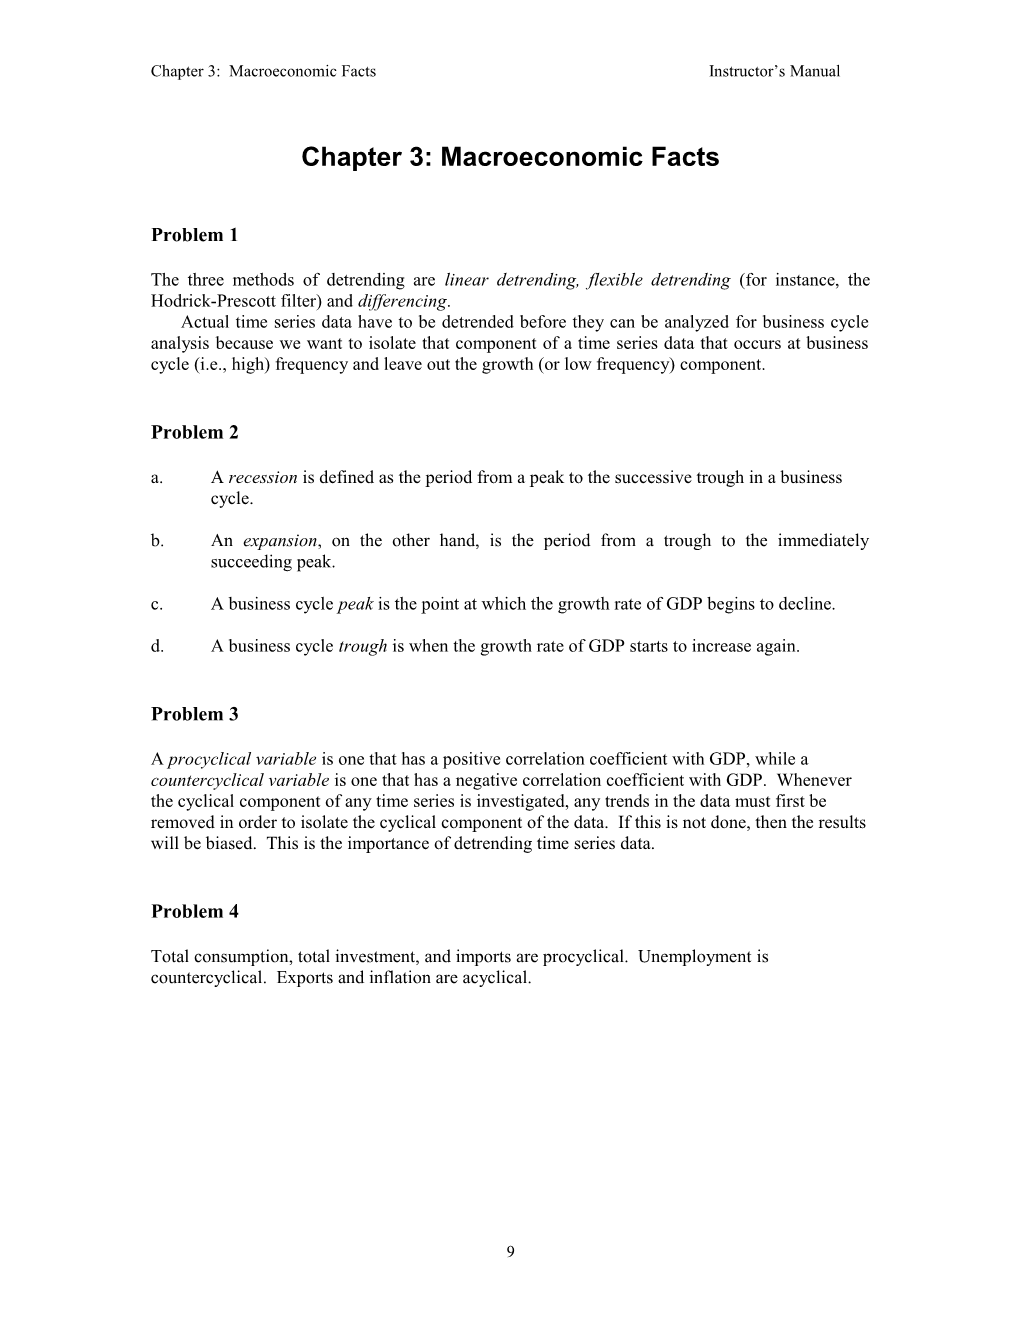 Solutions to Assignment 1, Chapter 1